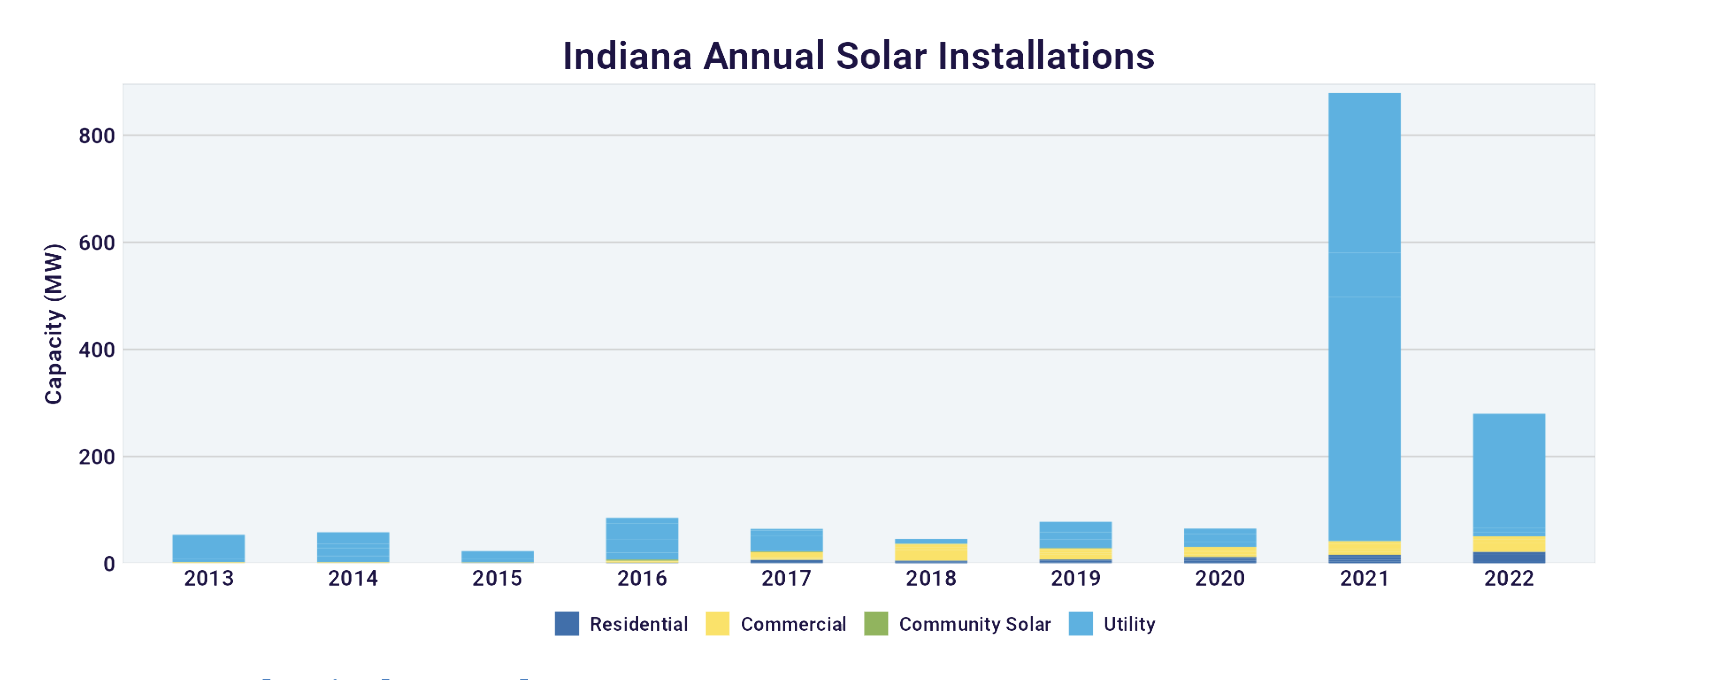 Indiana added only about a third as much solar in 2022 as it did in 2021, largely due to fewer utility-scale solar installations. (Courtesy of the Solar Energy Industries Association)